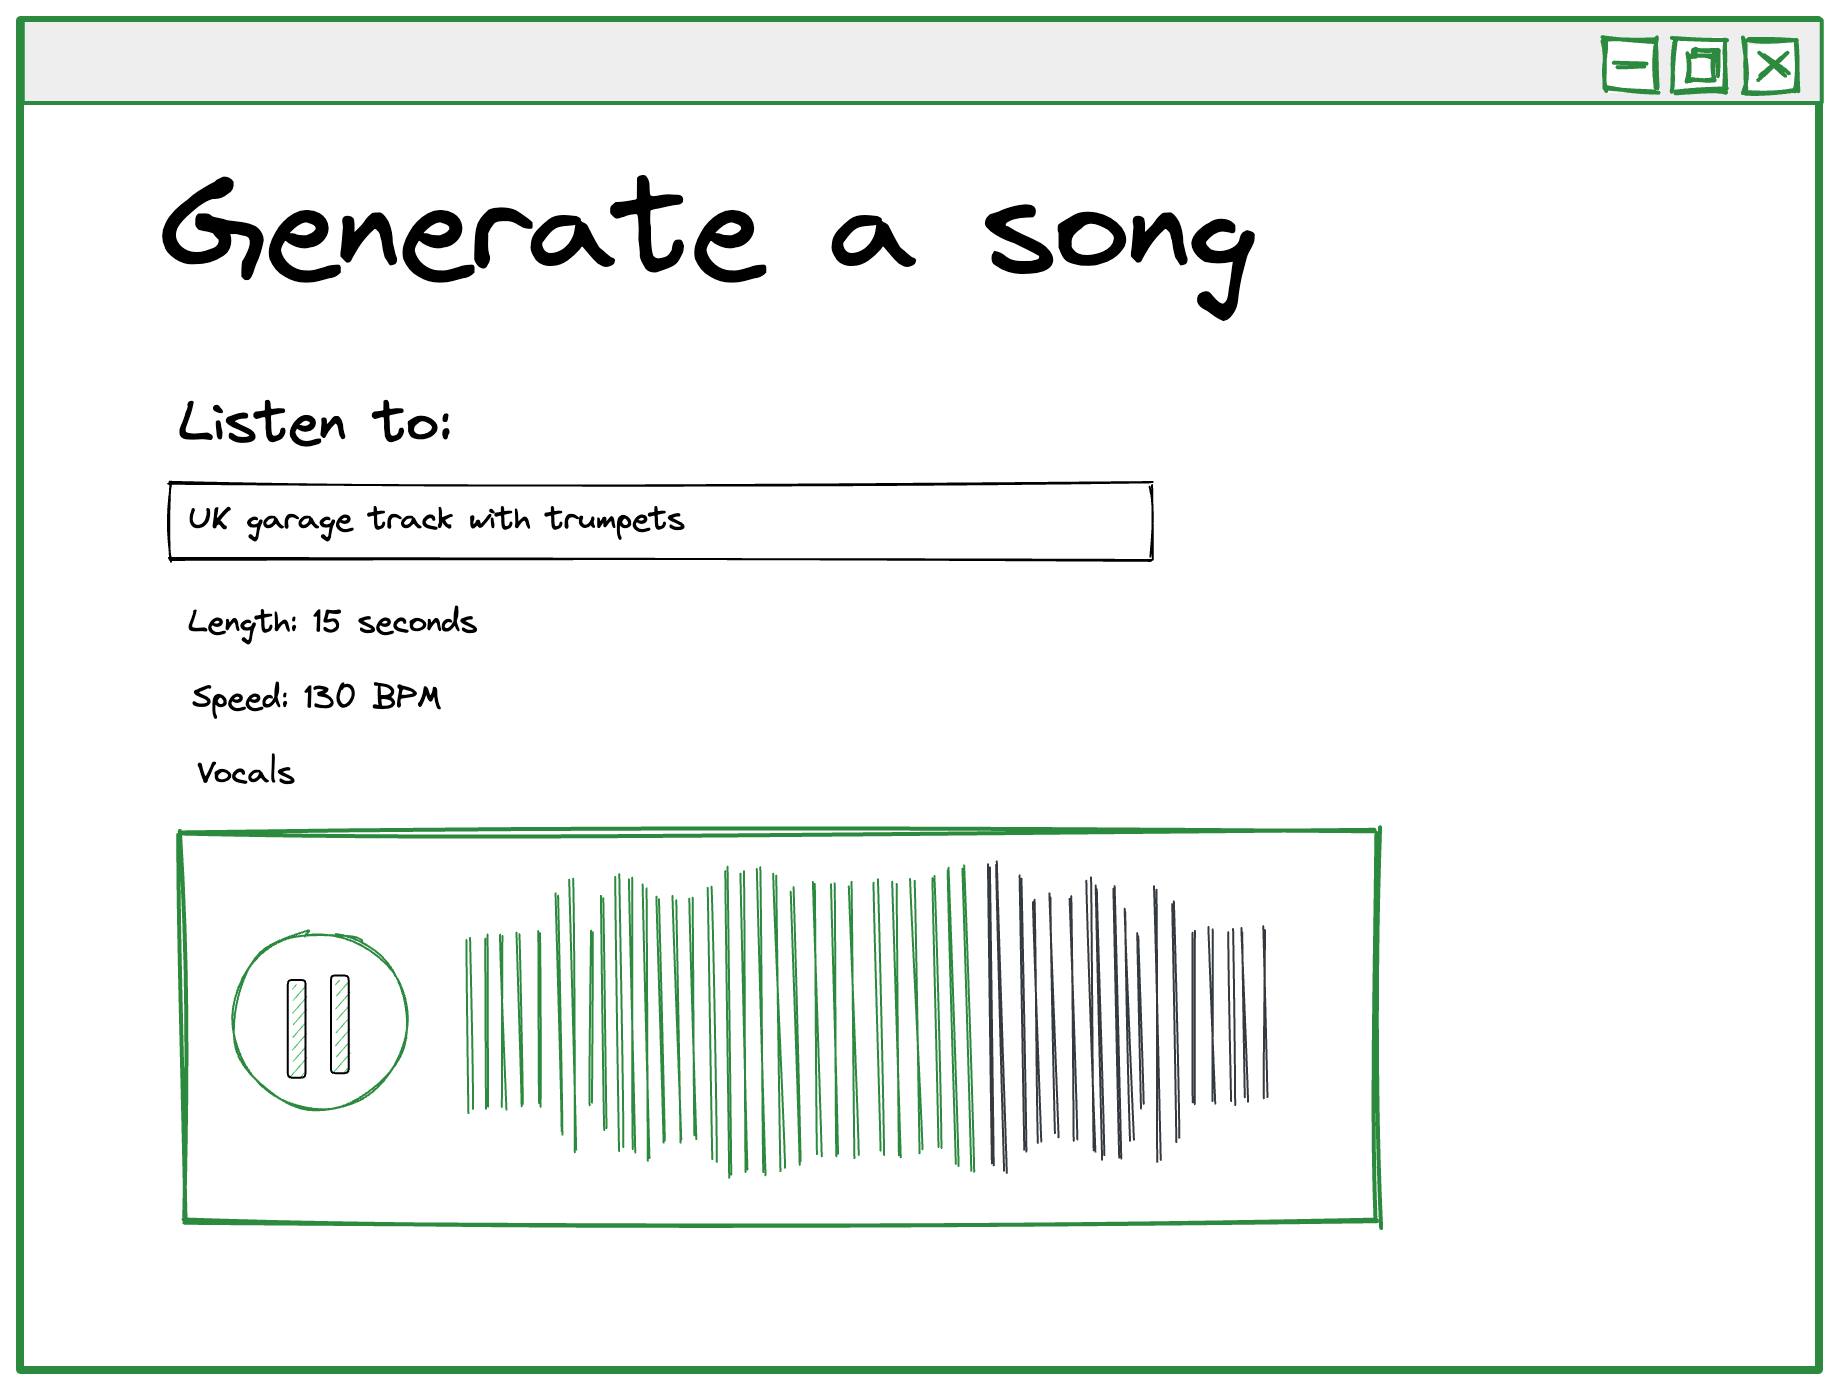 sketch mockup of a user interface titled “Generate a song” with a prompt of “UK garage track with trumpets” specified in a text box after “Listen to:” with a length of 15 seconds, a speed of 130 BPM, and Vocals. The Play button is now a green Pause button and the audio waveform is highlighted in green to indicate that it is playing.